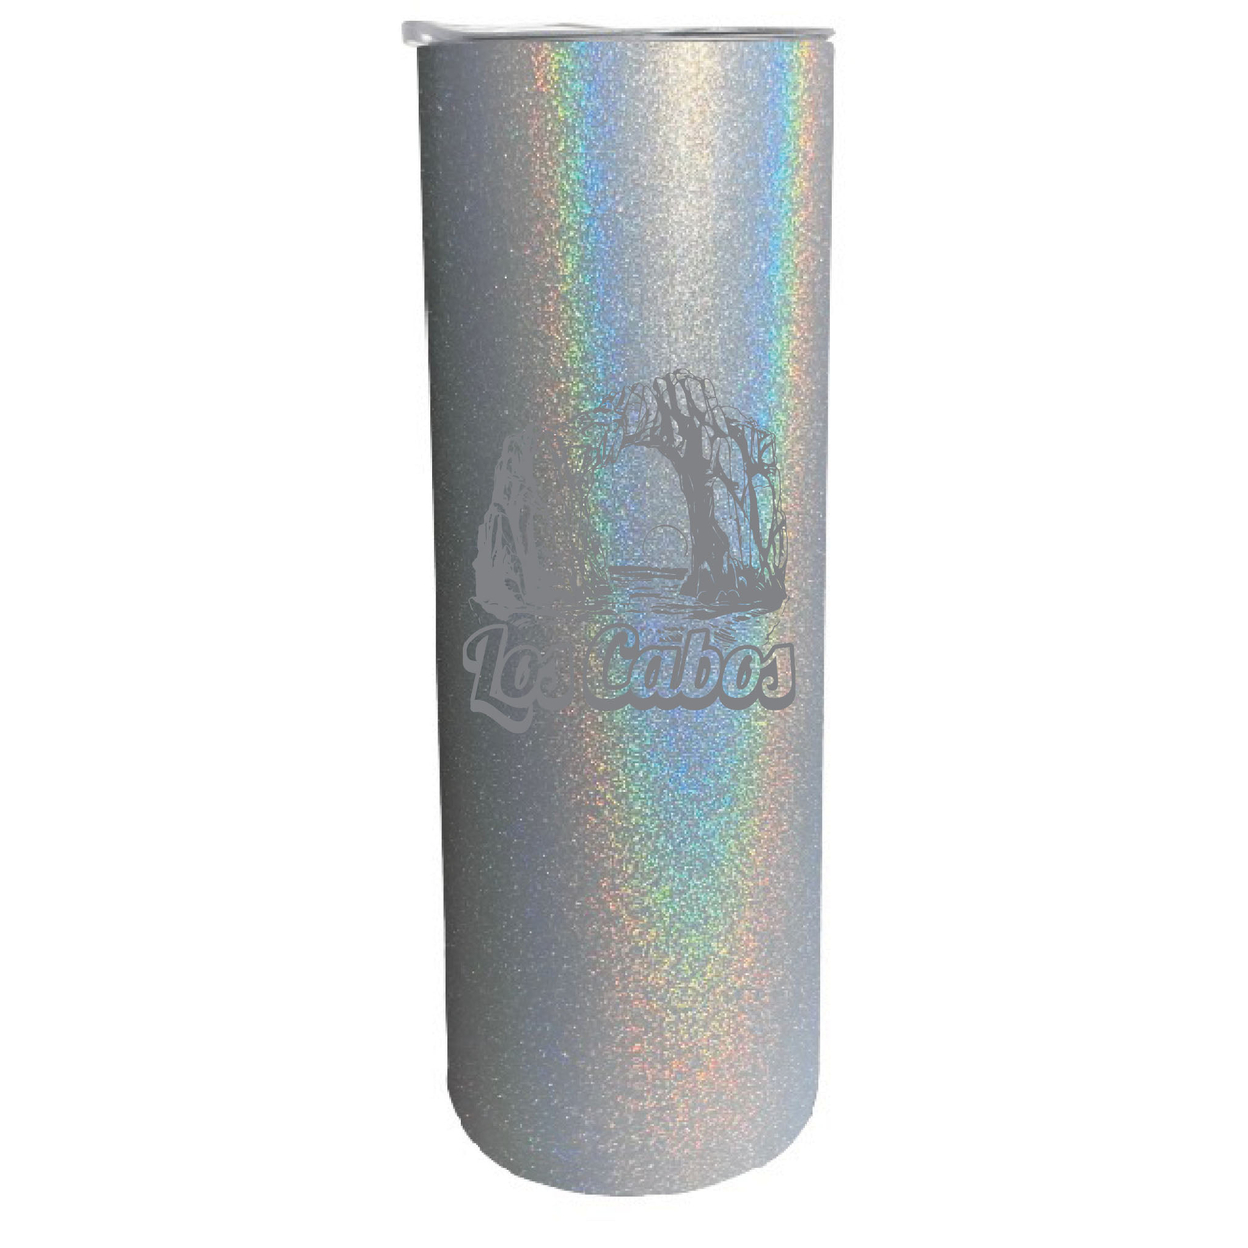 Los Cabos Mexico Souvenir 20 Oz Engraved Insulated Stainless Steel Skinny Tumbler - Gray Glitter,,Single Unit